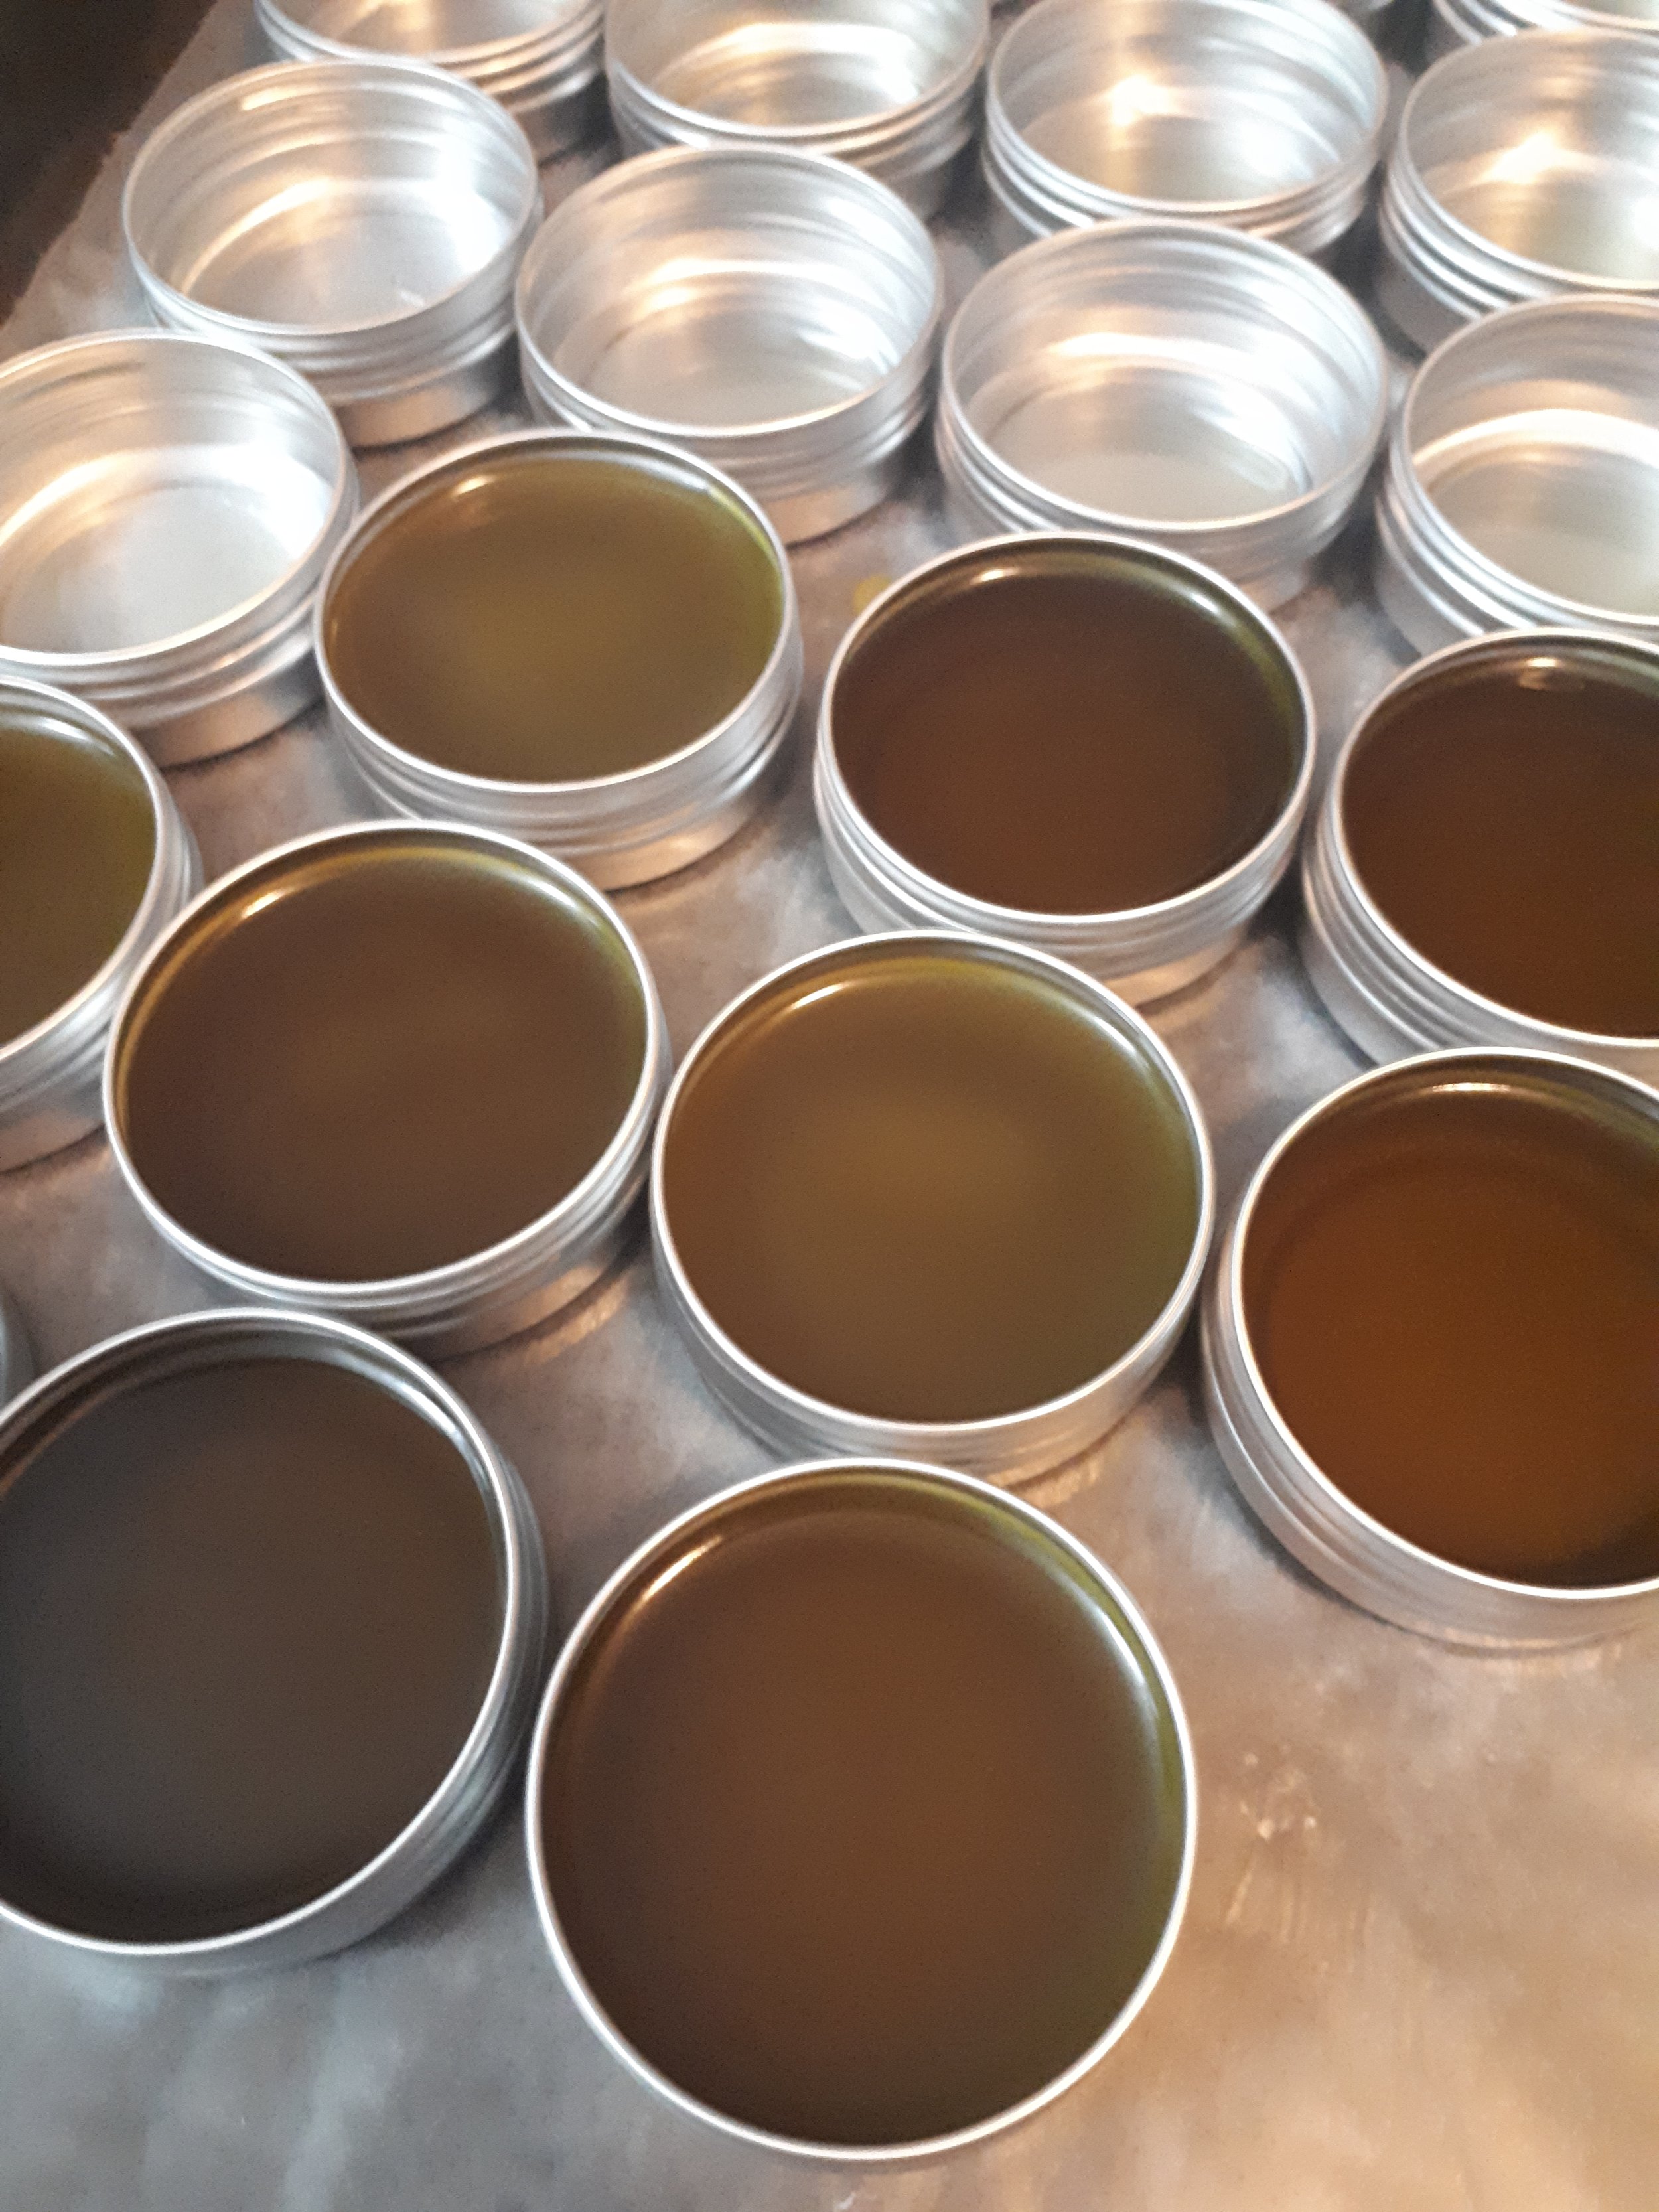 infused oils workshop -  salve blends solidifying into tins 13 Moons Booty Balm.jpg